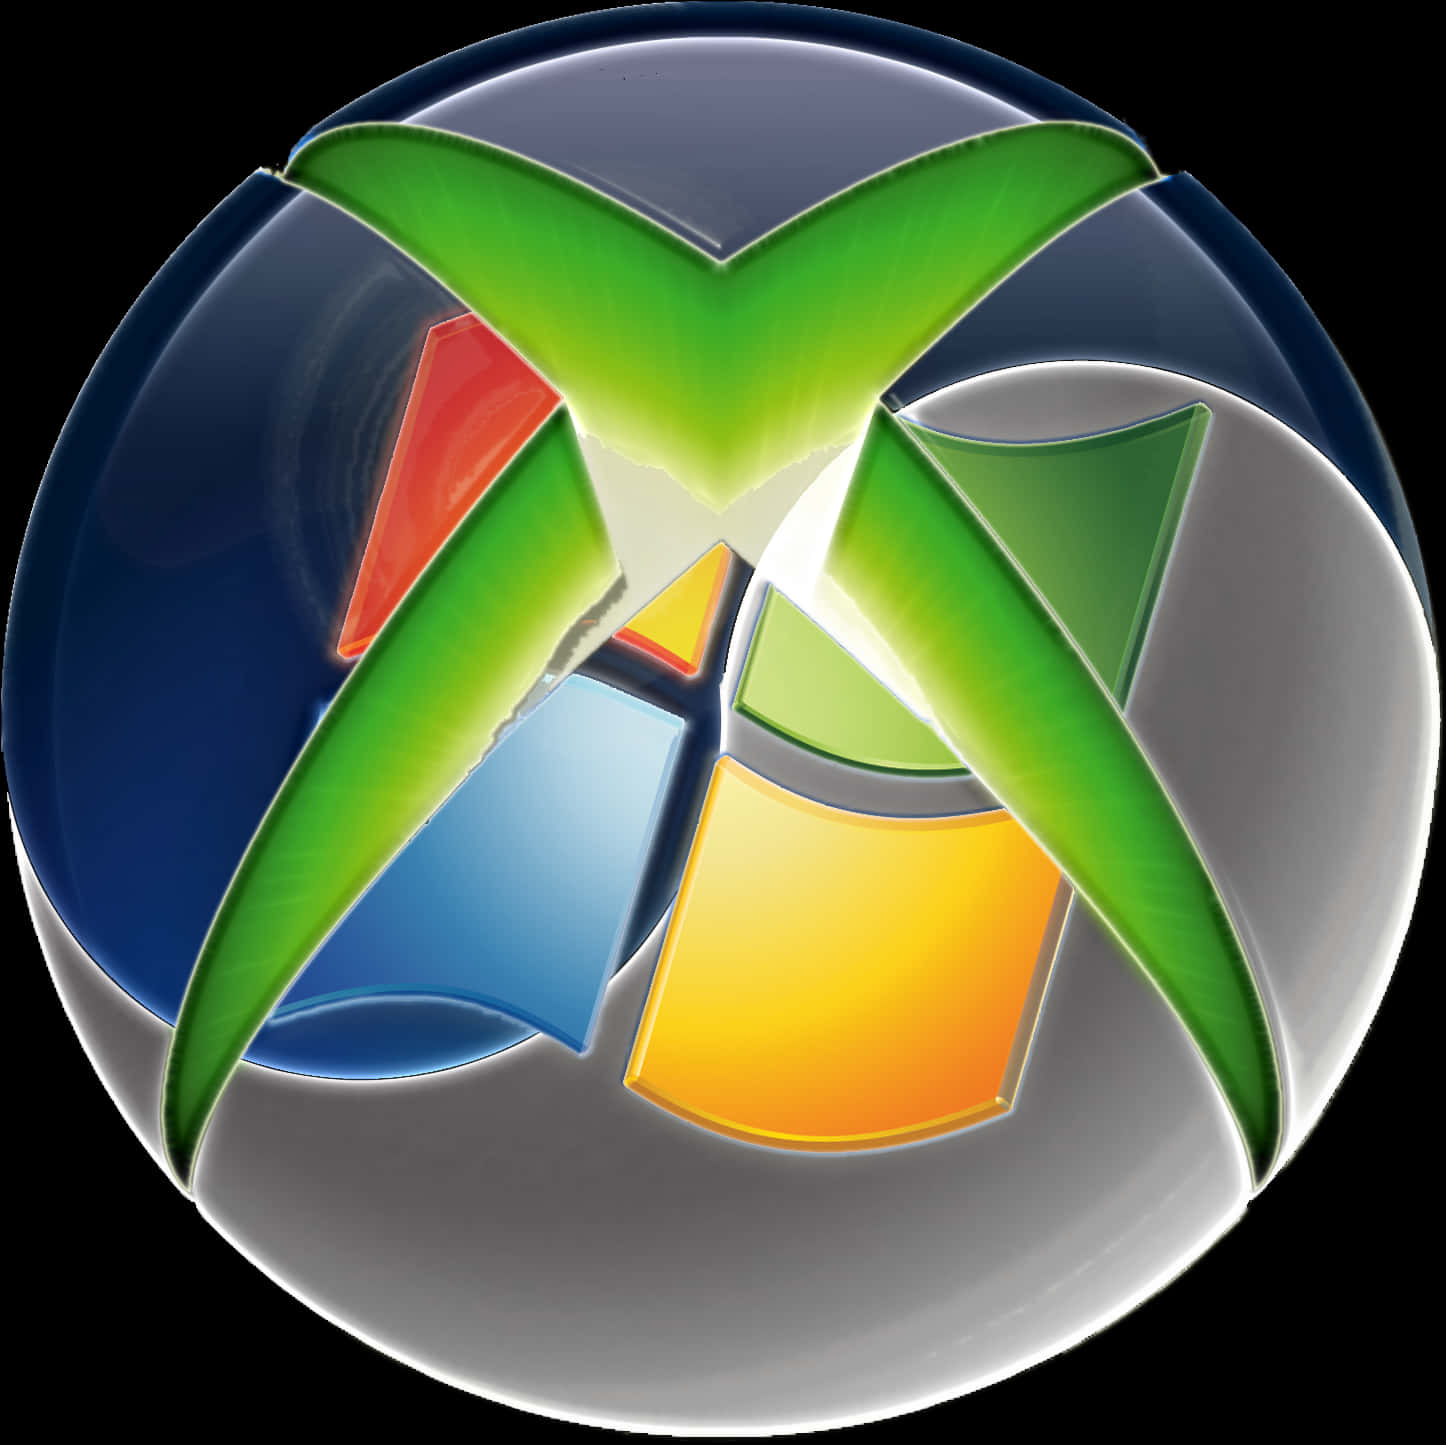 Xbox Logo Glossy Button PNG image